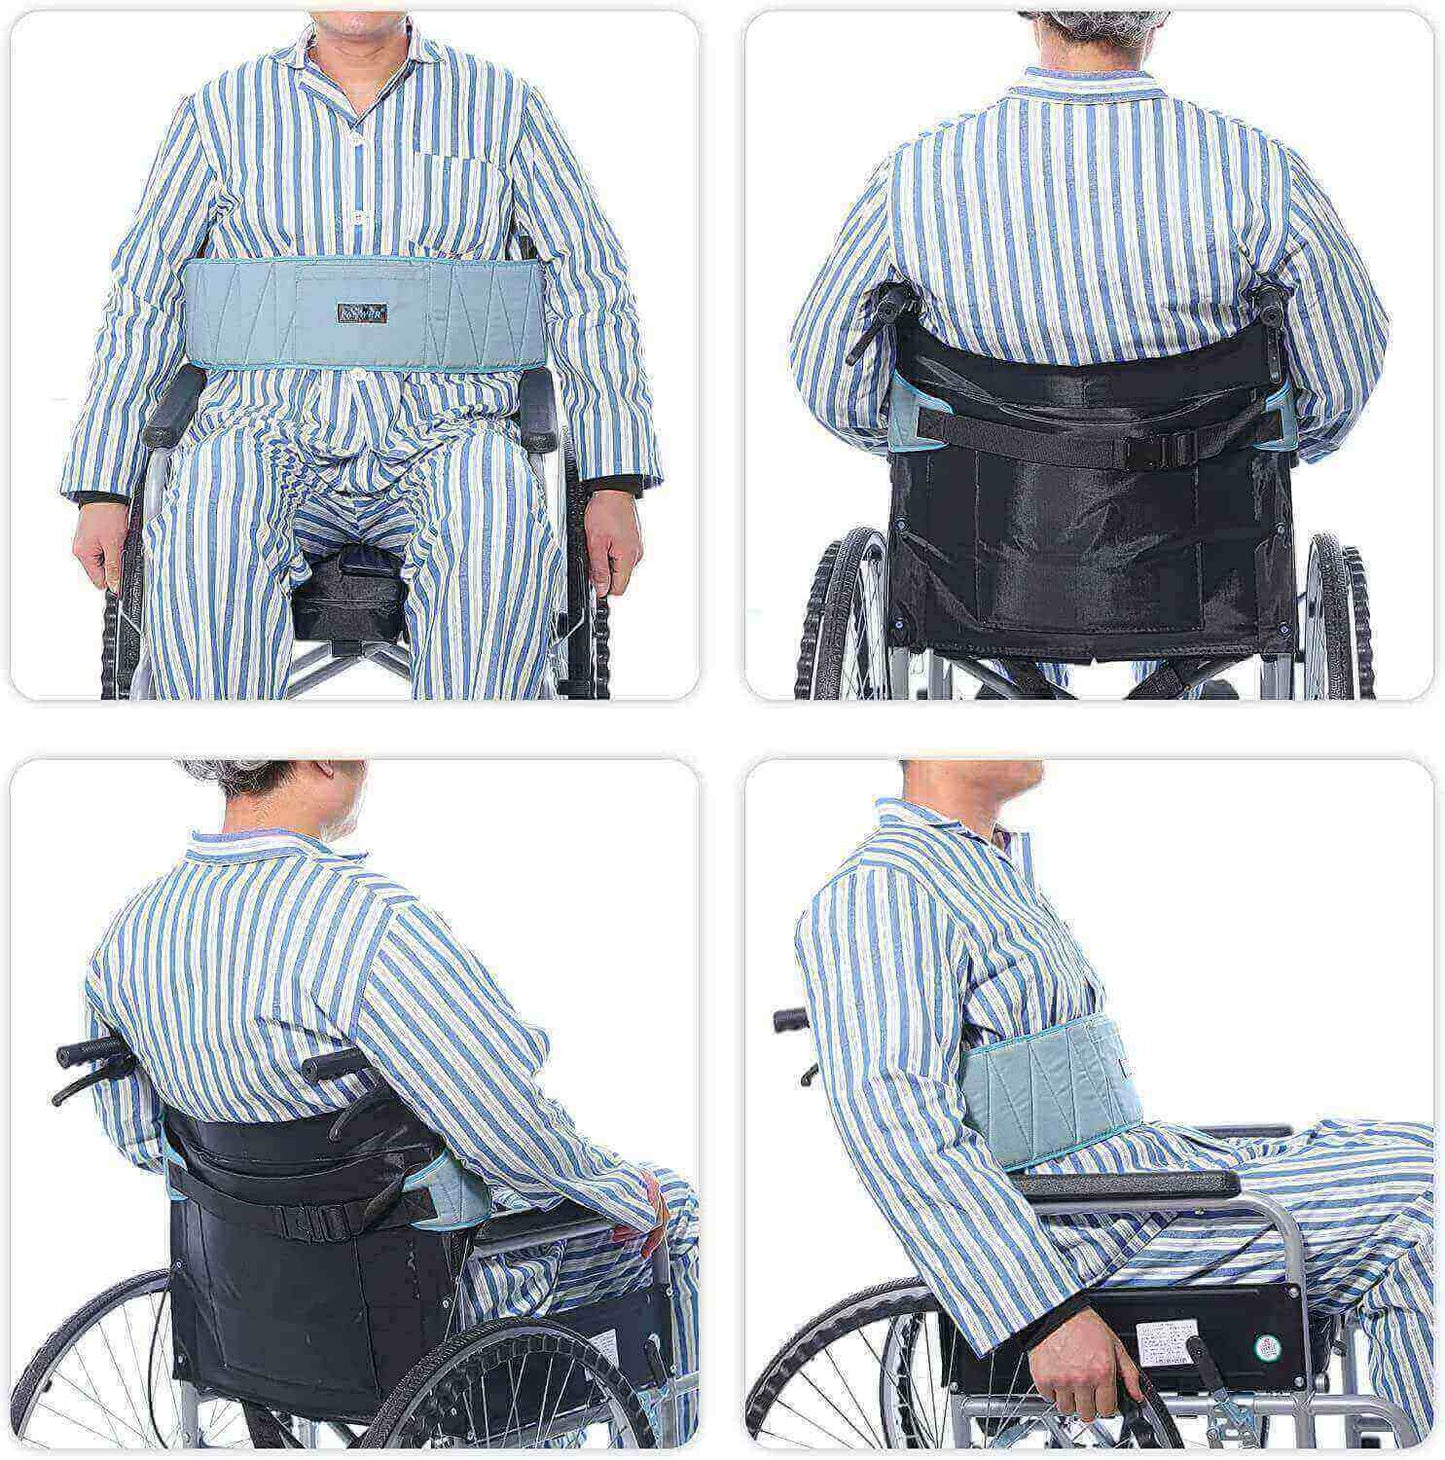 Fanwer Wheelchair Straps and Harness for Sale, man photo from four directions